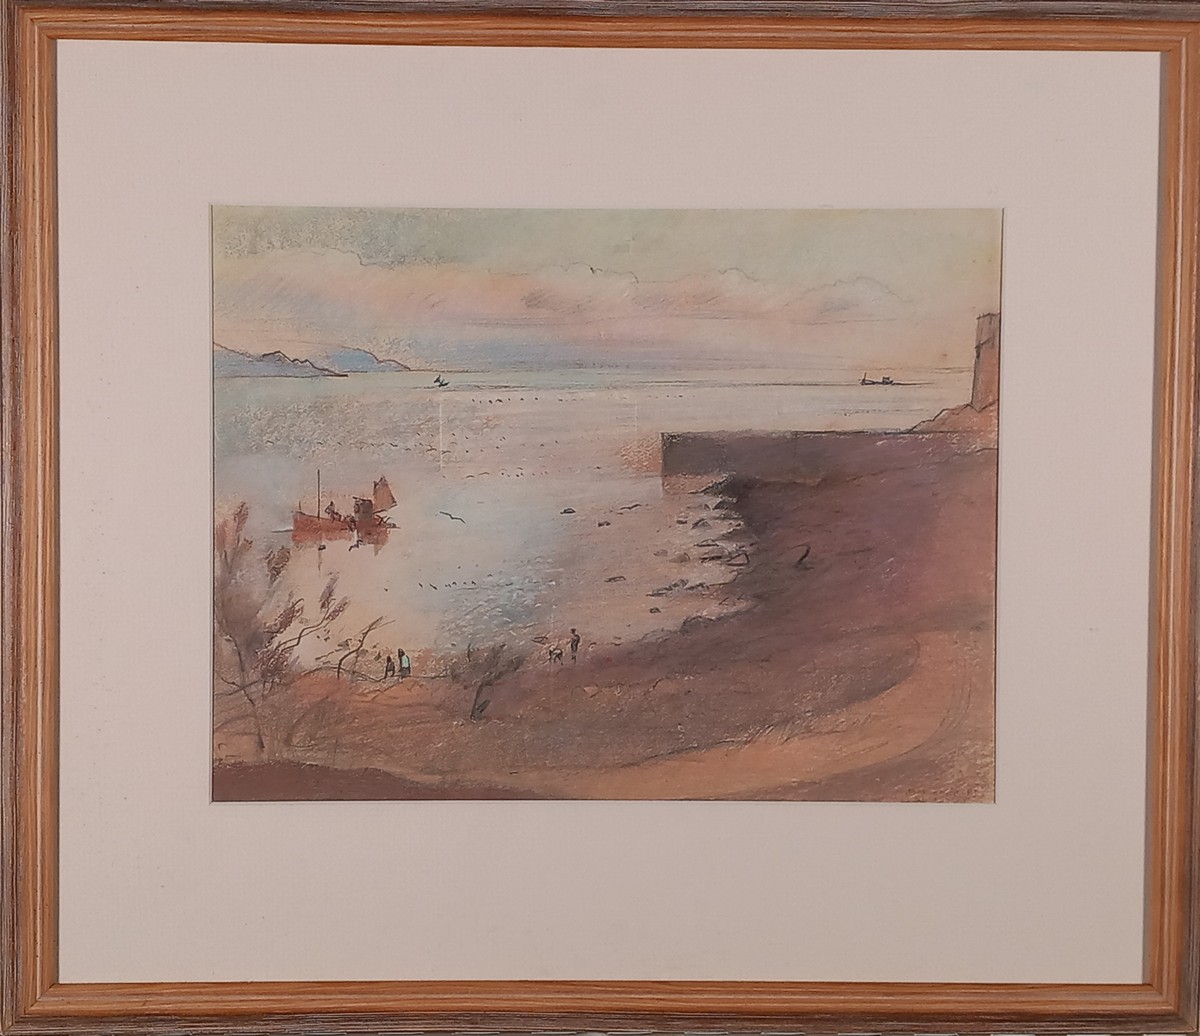 Ken SYMONDS (British 1927-2010) Newlyn, Pastel and pencil on paper, Signed and dated ’83 lower - Image 2 of 3